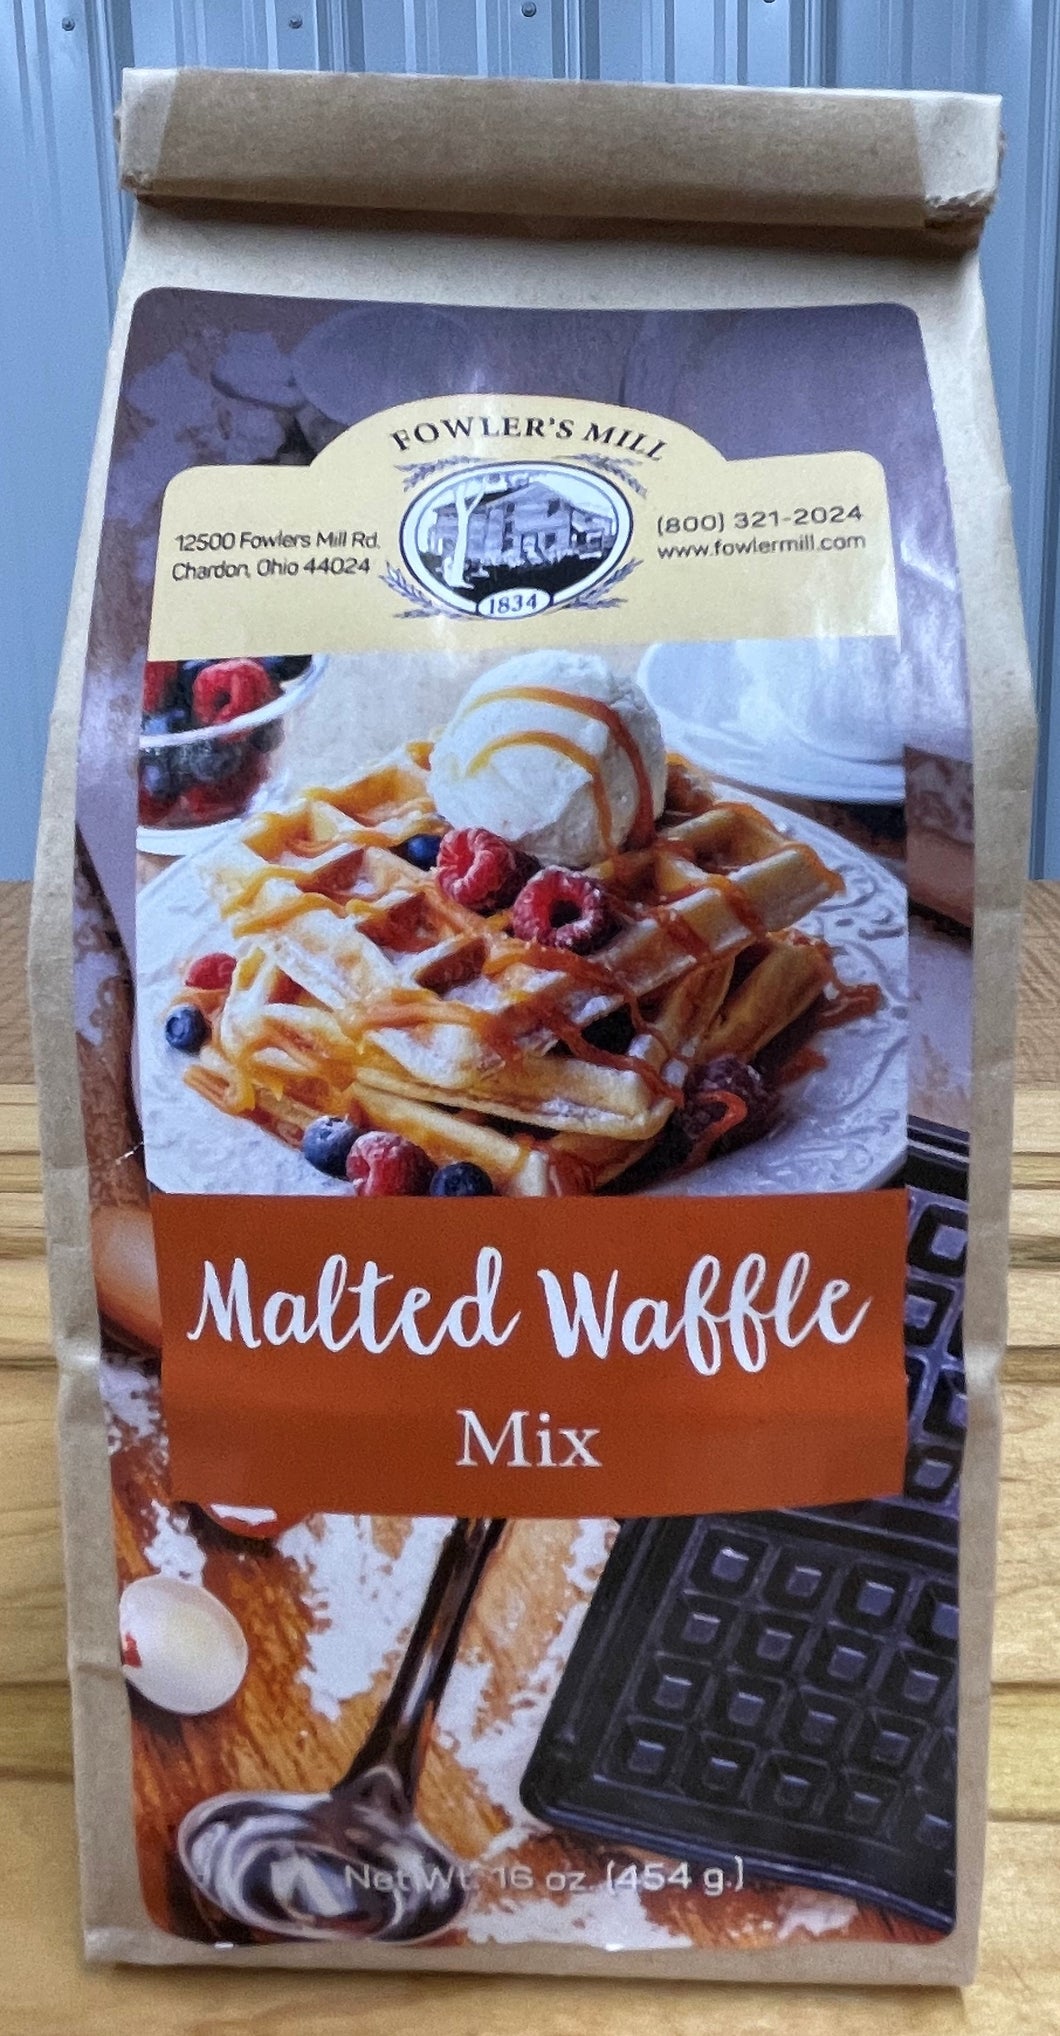 Fowler's Mill Malted Waffle Mix